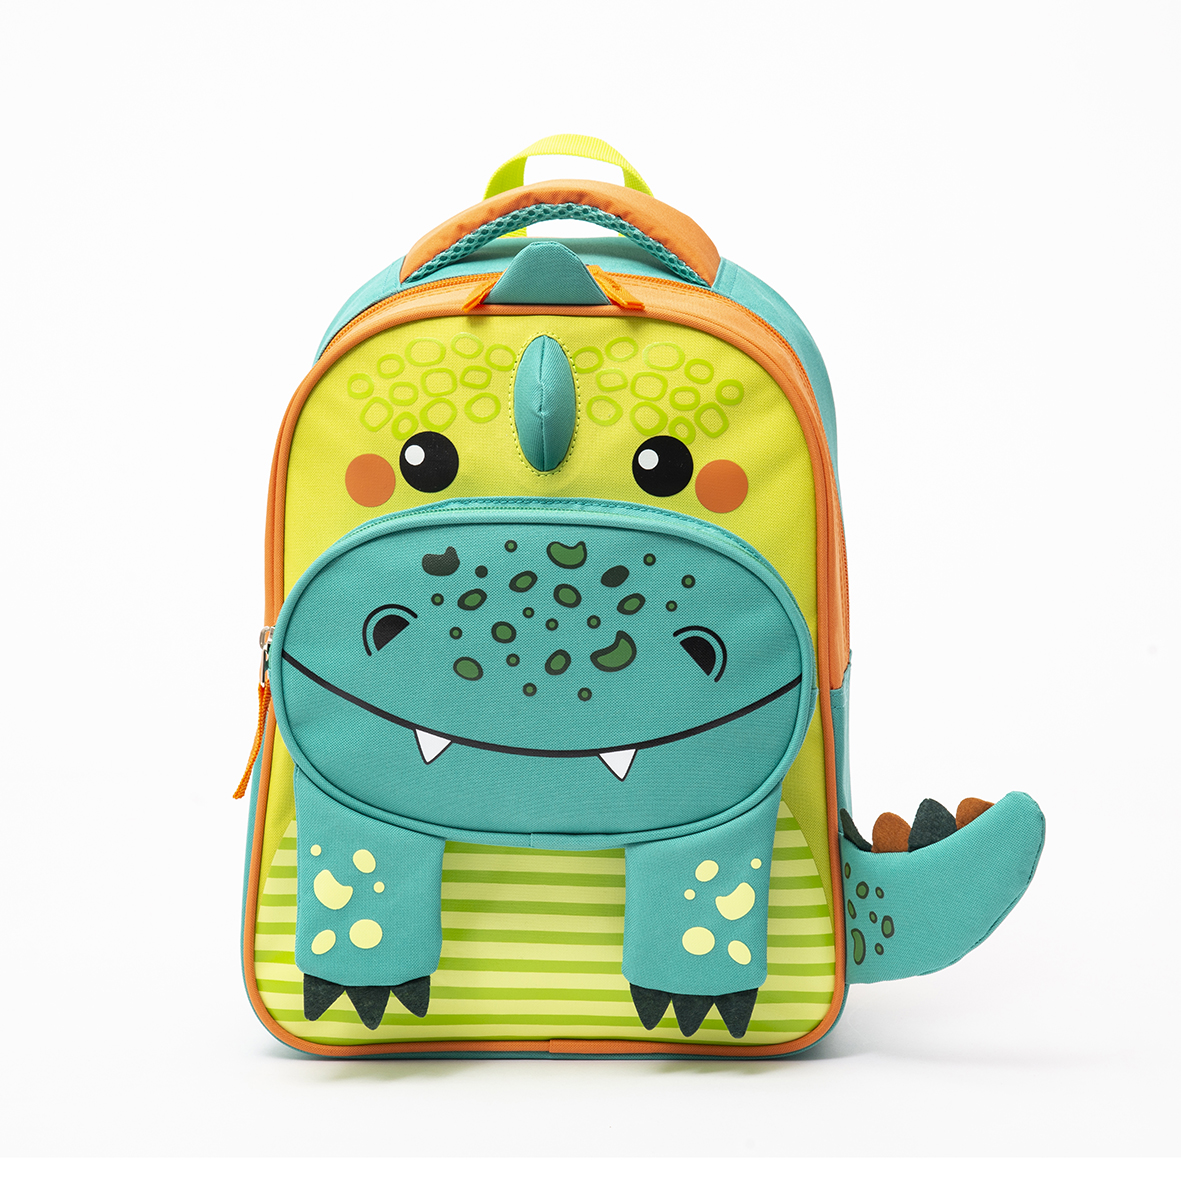 Manufacturer of Multi-Function Baby Nappy Storage Bag - New design cute stereoscopic green crocodile kids bag – Twinkling Star